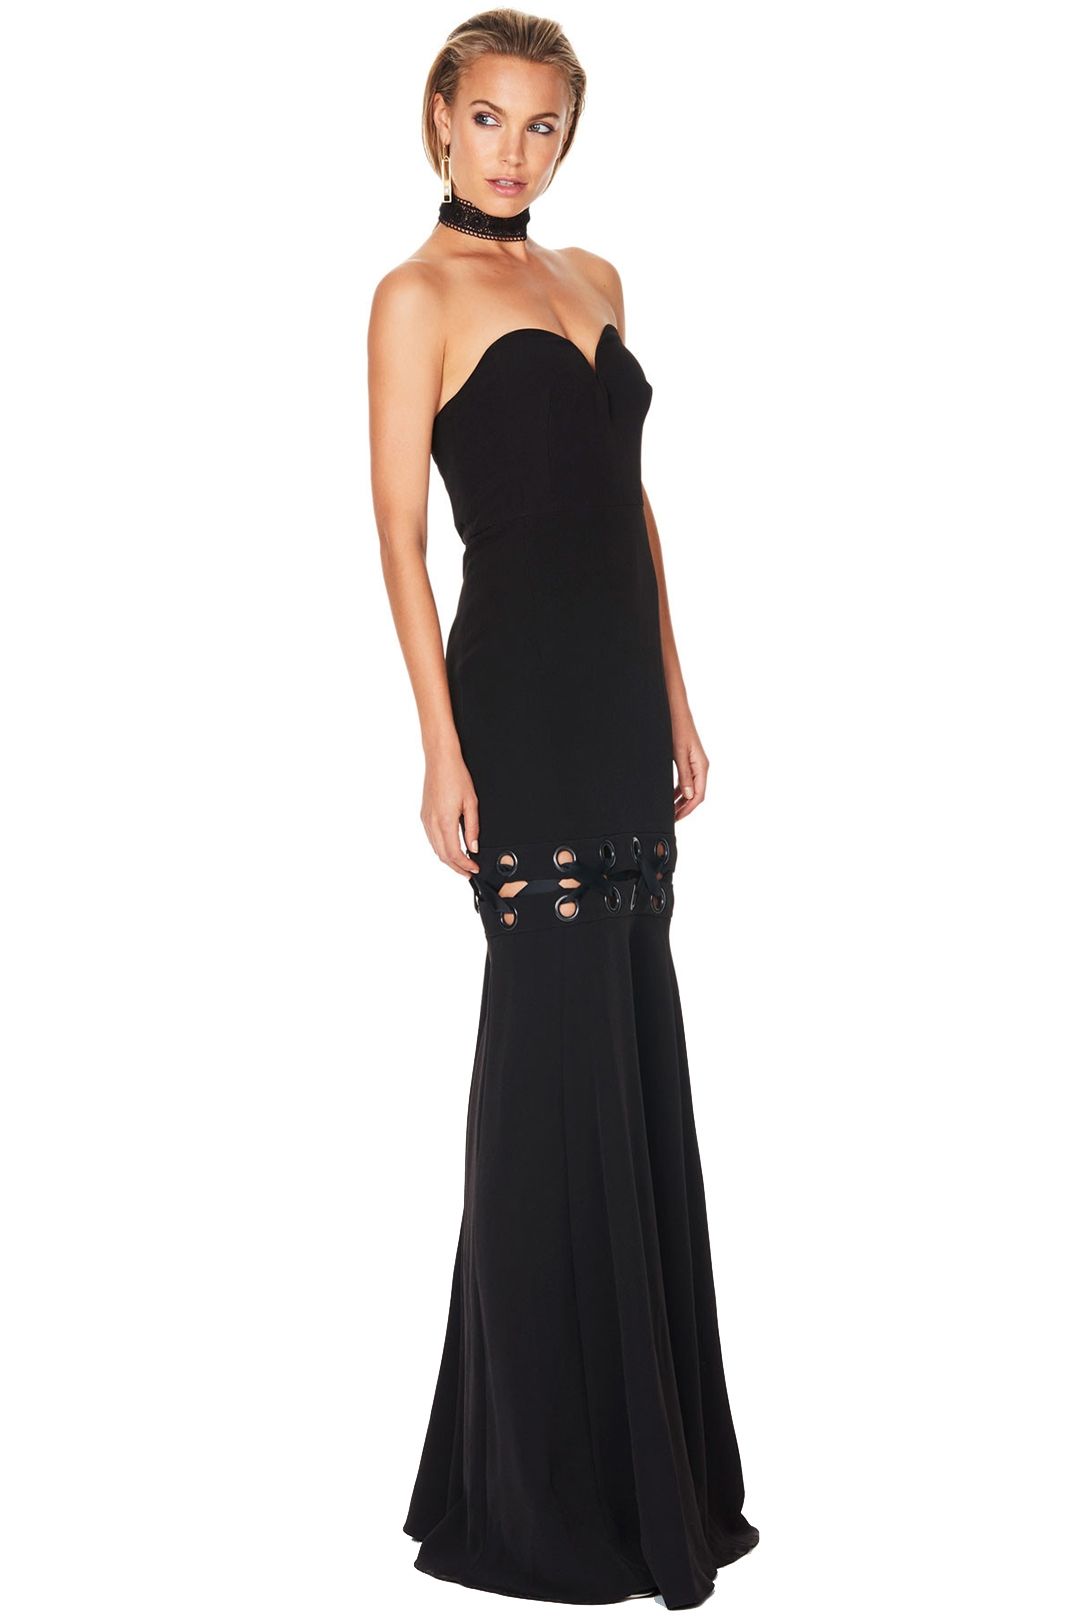 Talulah - Lace Me Gown - Black - Side